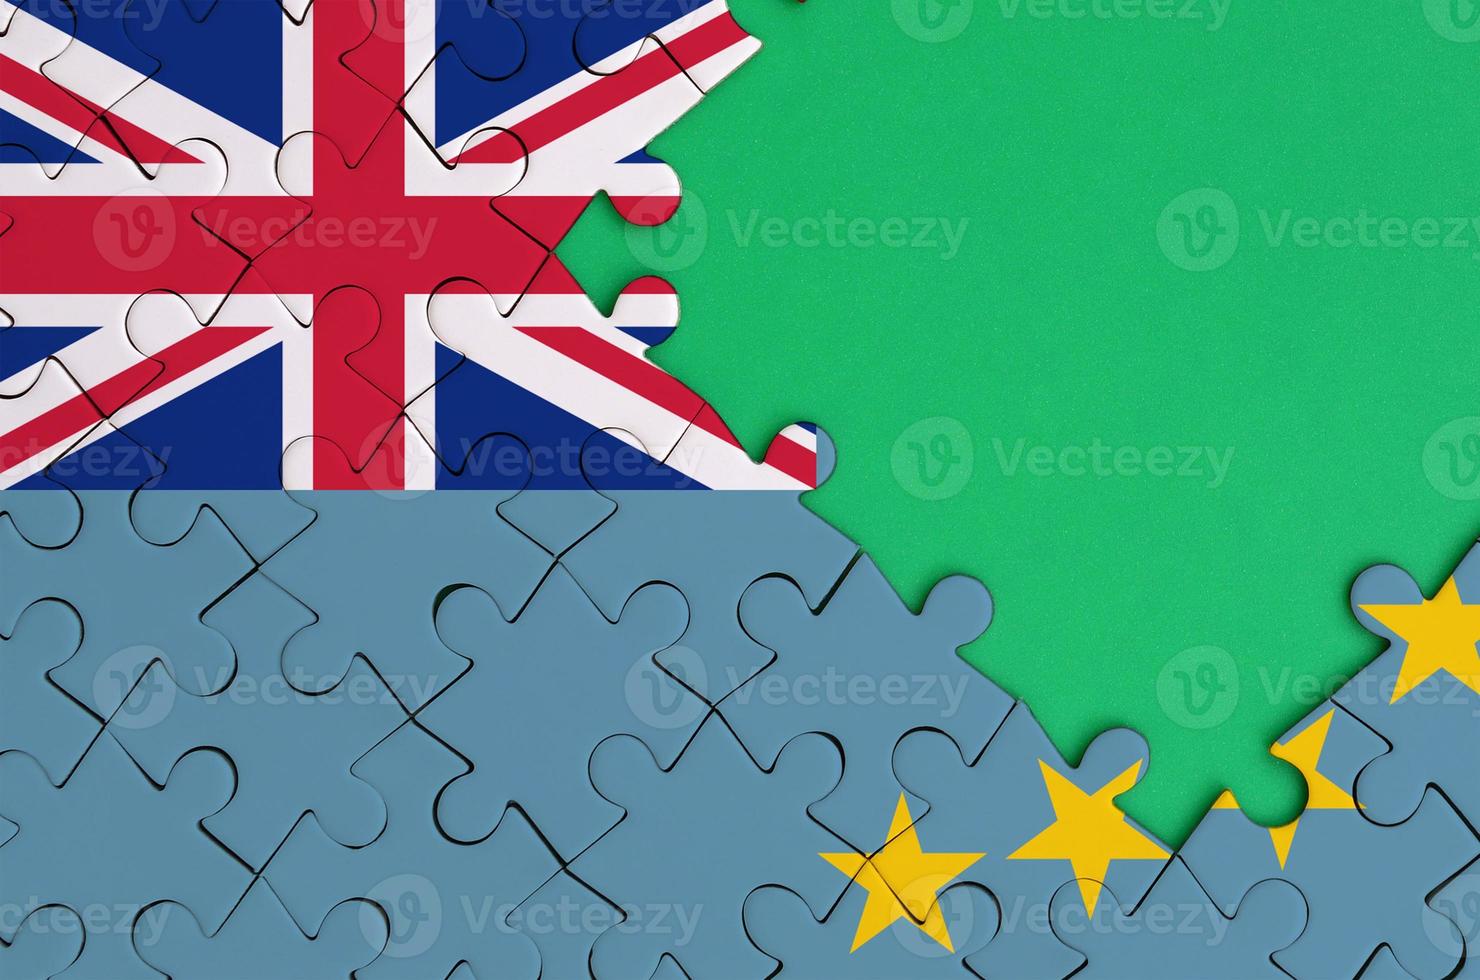 Tuvalu flag is depicted on a completed jigsaw puzzle with free green copy space on the right side photo